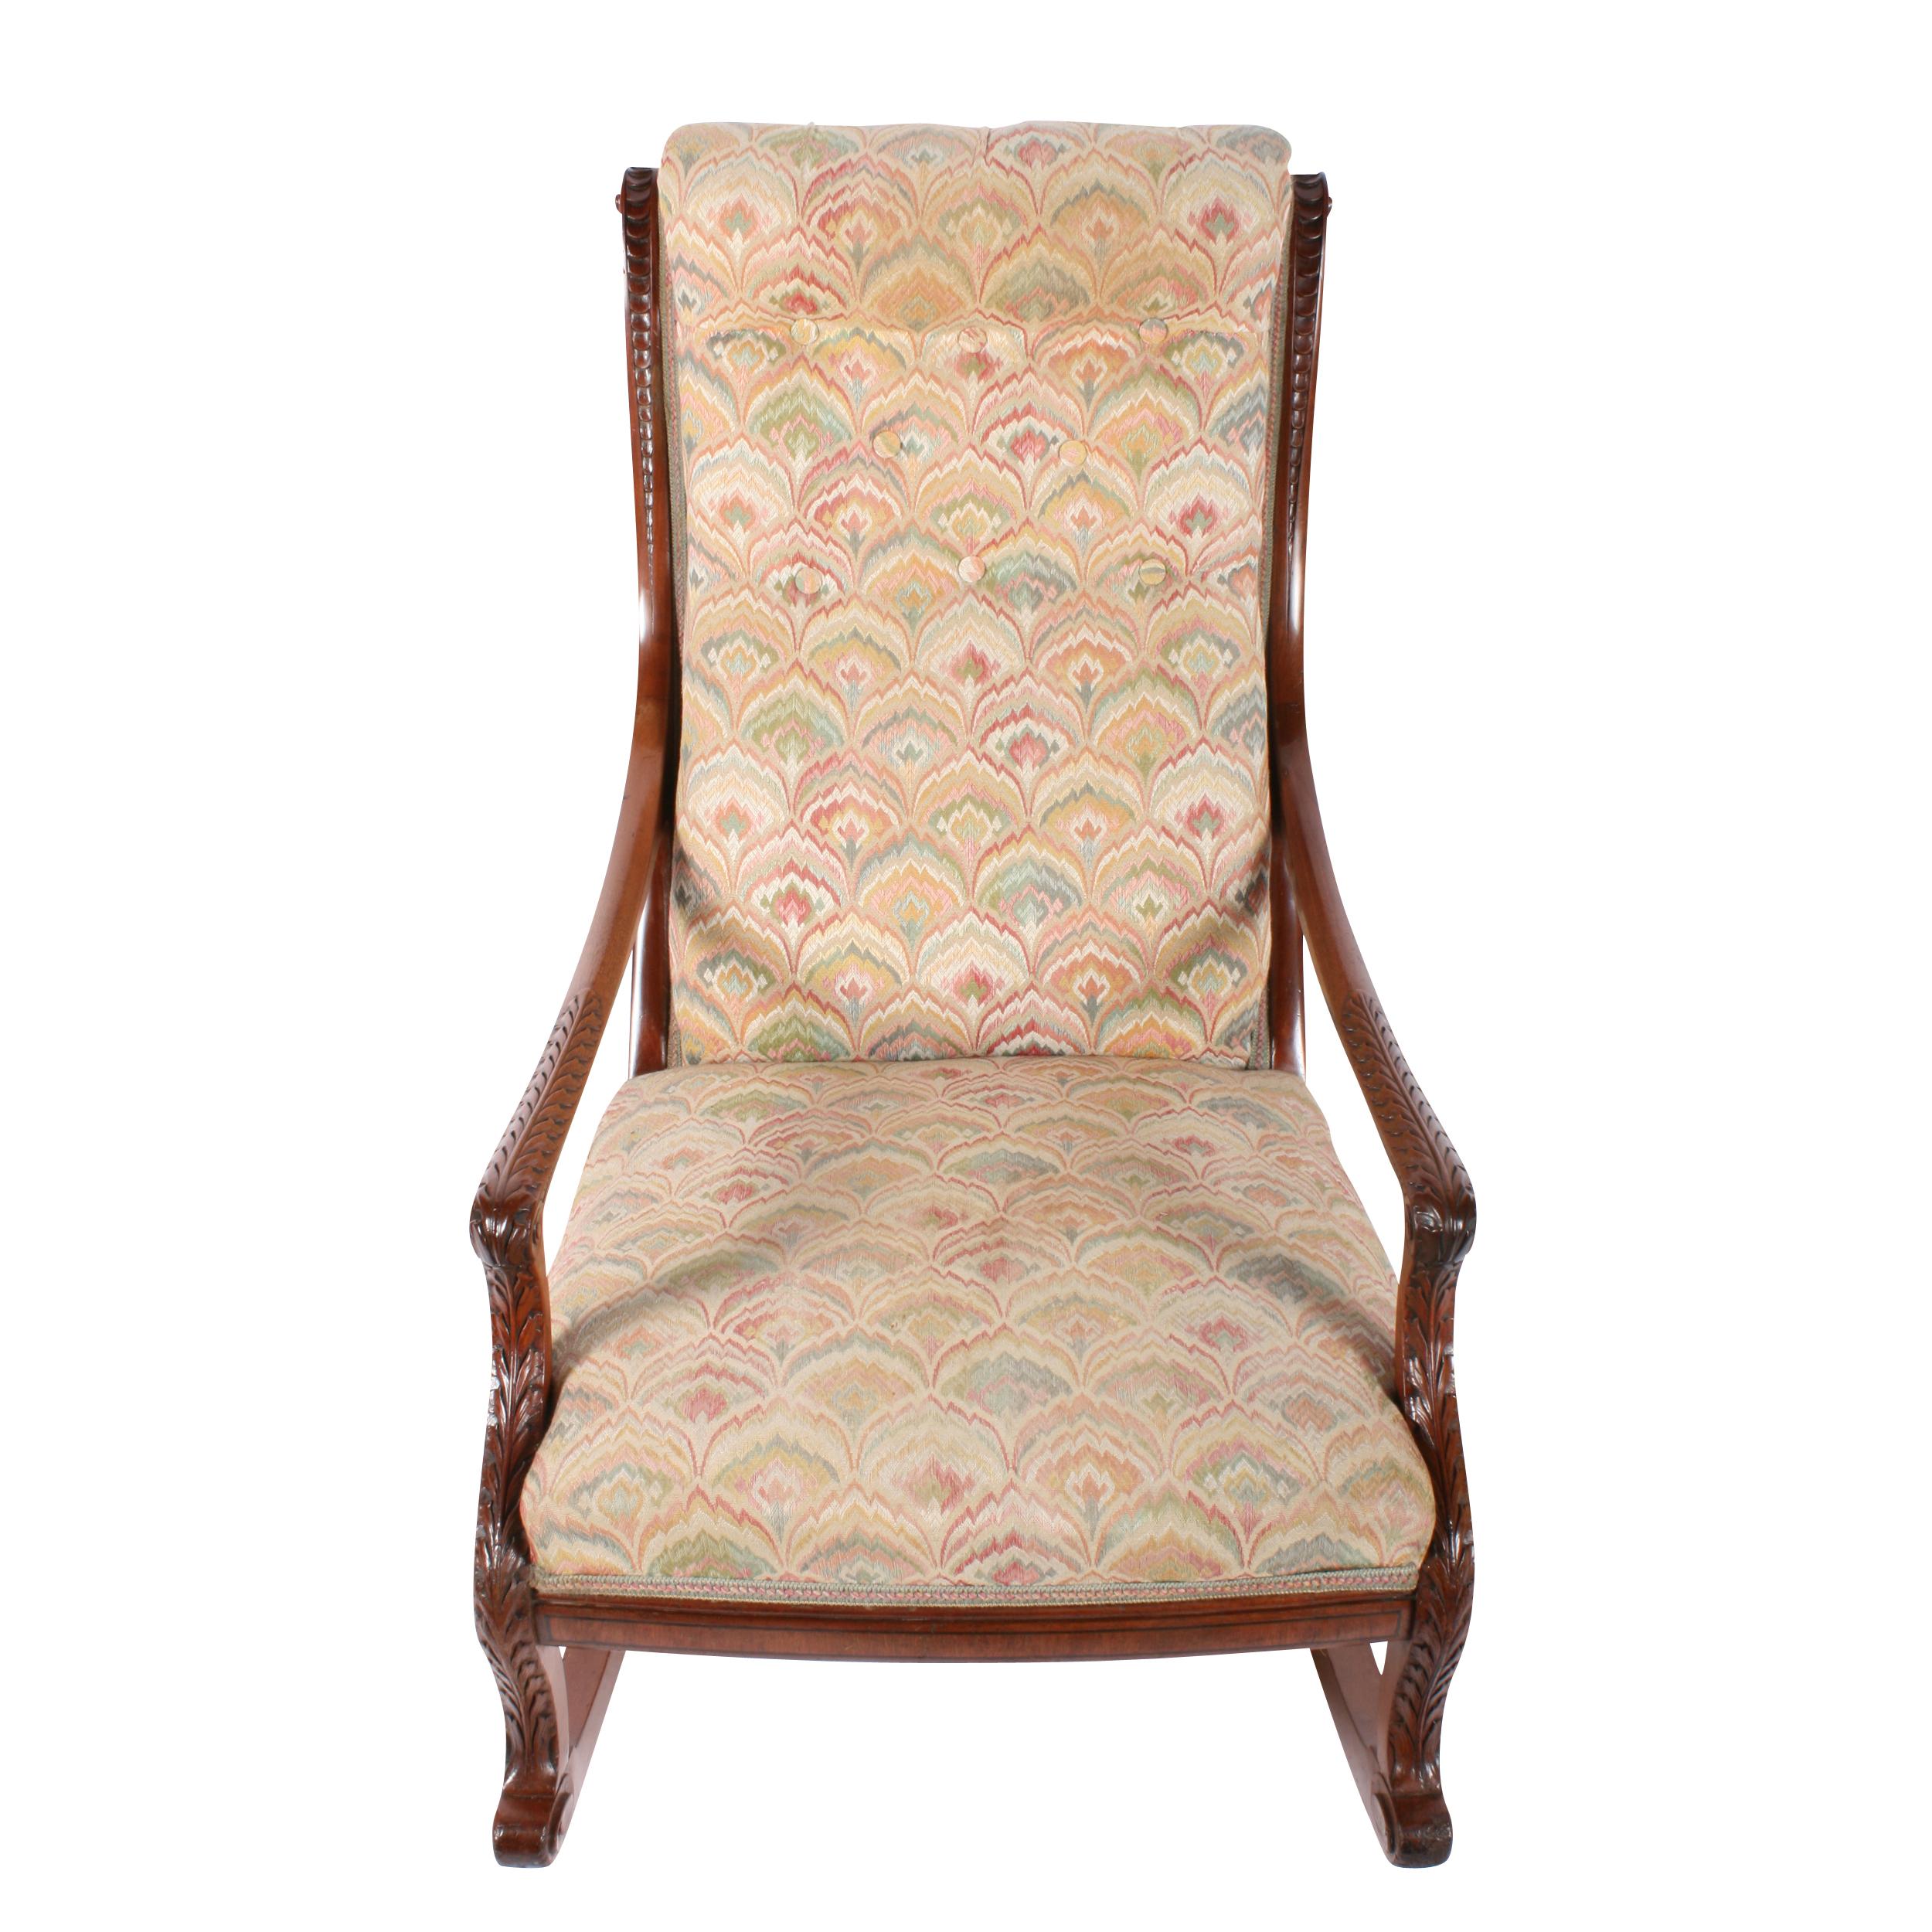 A 19th century Victorian mahogany rocking armchair.

The chair has long acanthus carved arms with the carving continuing along the front of the cabriole legs.

The chair has a high back with button back upholstery and the mahogany frame either